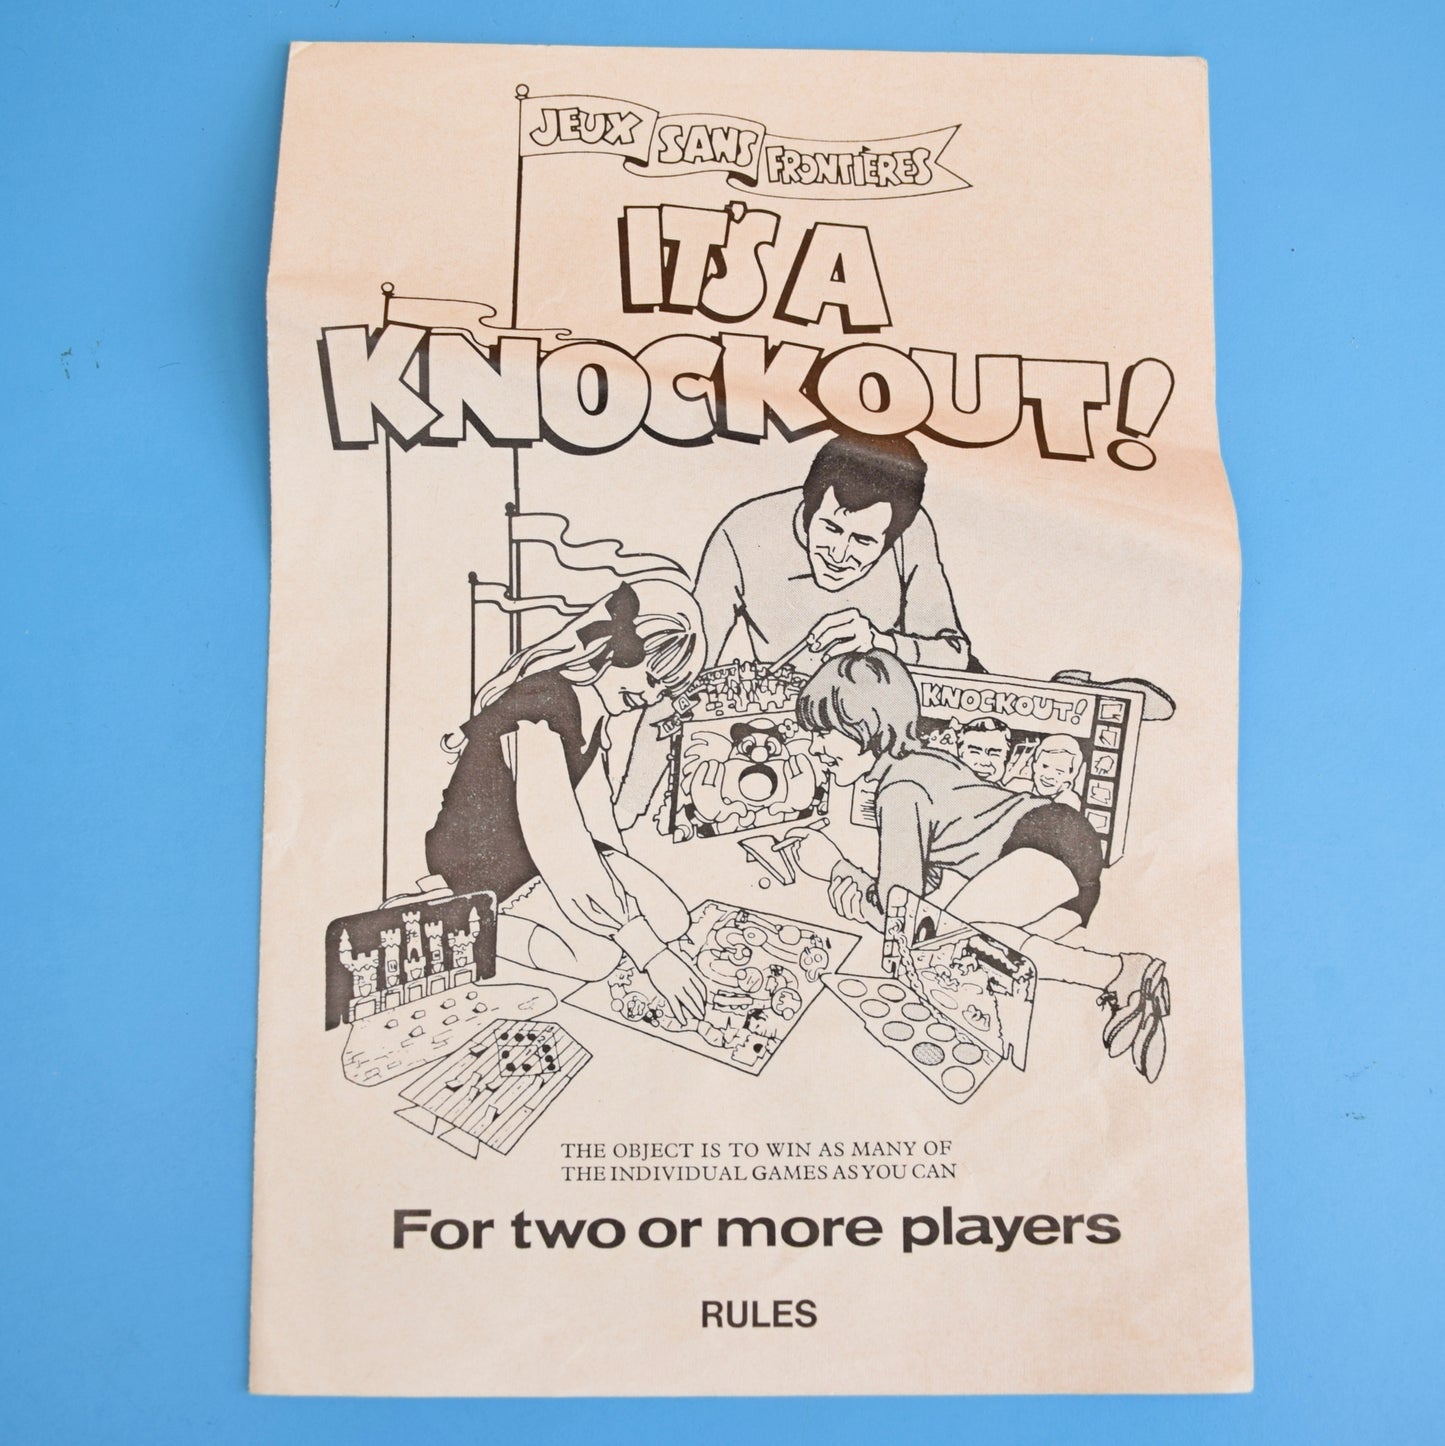 Vintage 1970s Game - Its A Knockout - Denys Fisher